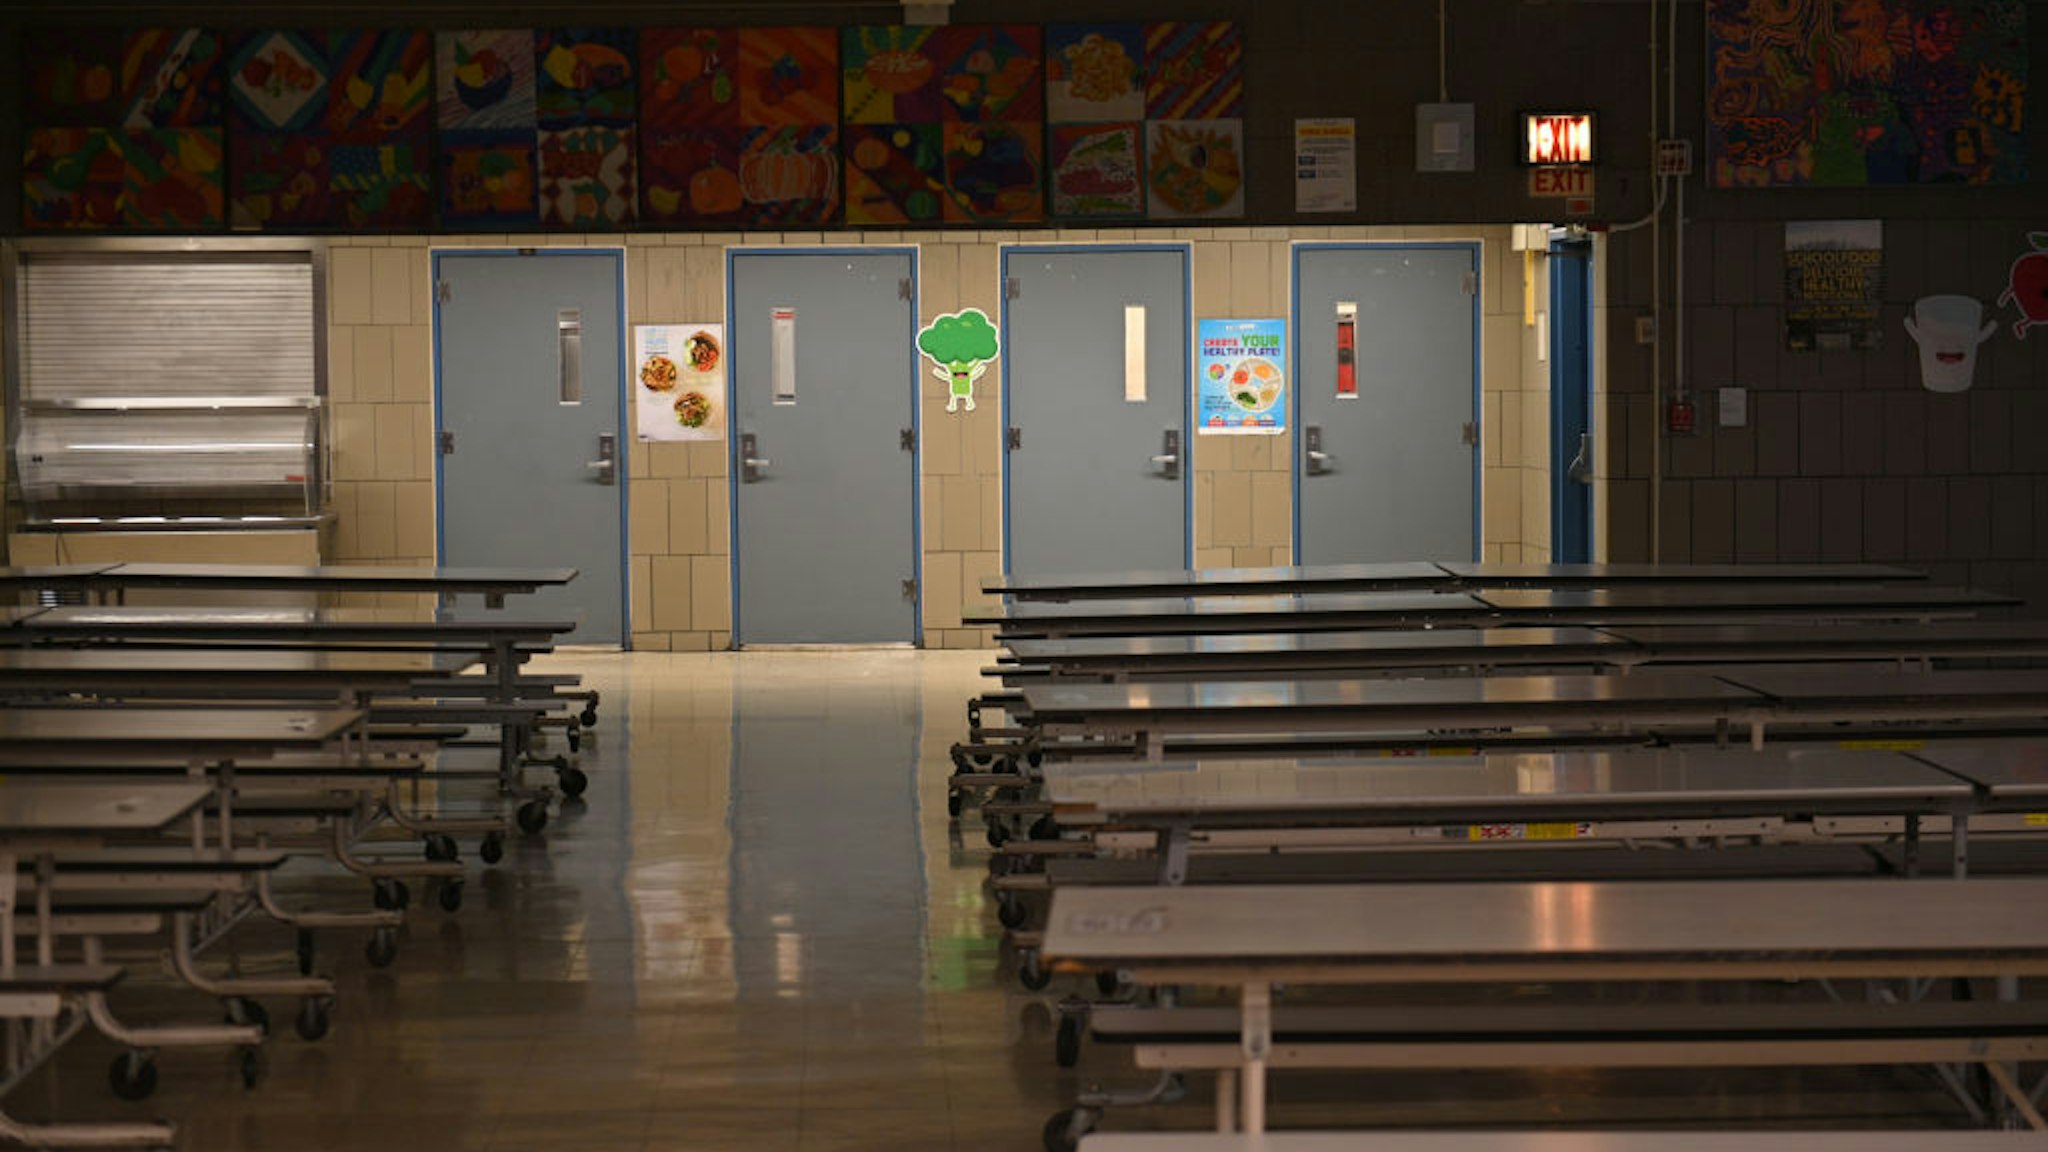 NEW YORK, NY - MARCH 19: The cafeteria is empty on what would otherwise be a school day at Yung Wing School P.S. 124 in the Manhattan borough of New York City. Public schools in New York City have been shut down until at least until April 20th amid the spread of coronavirus (COVID-19). (Photo by Michael Loccisano/Getty Images)